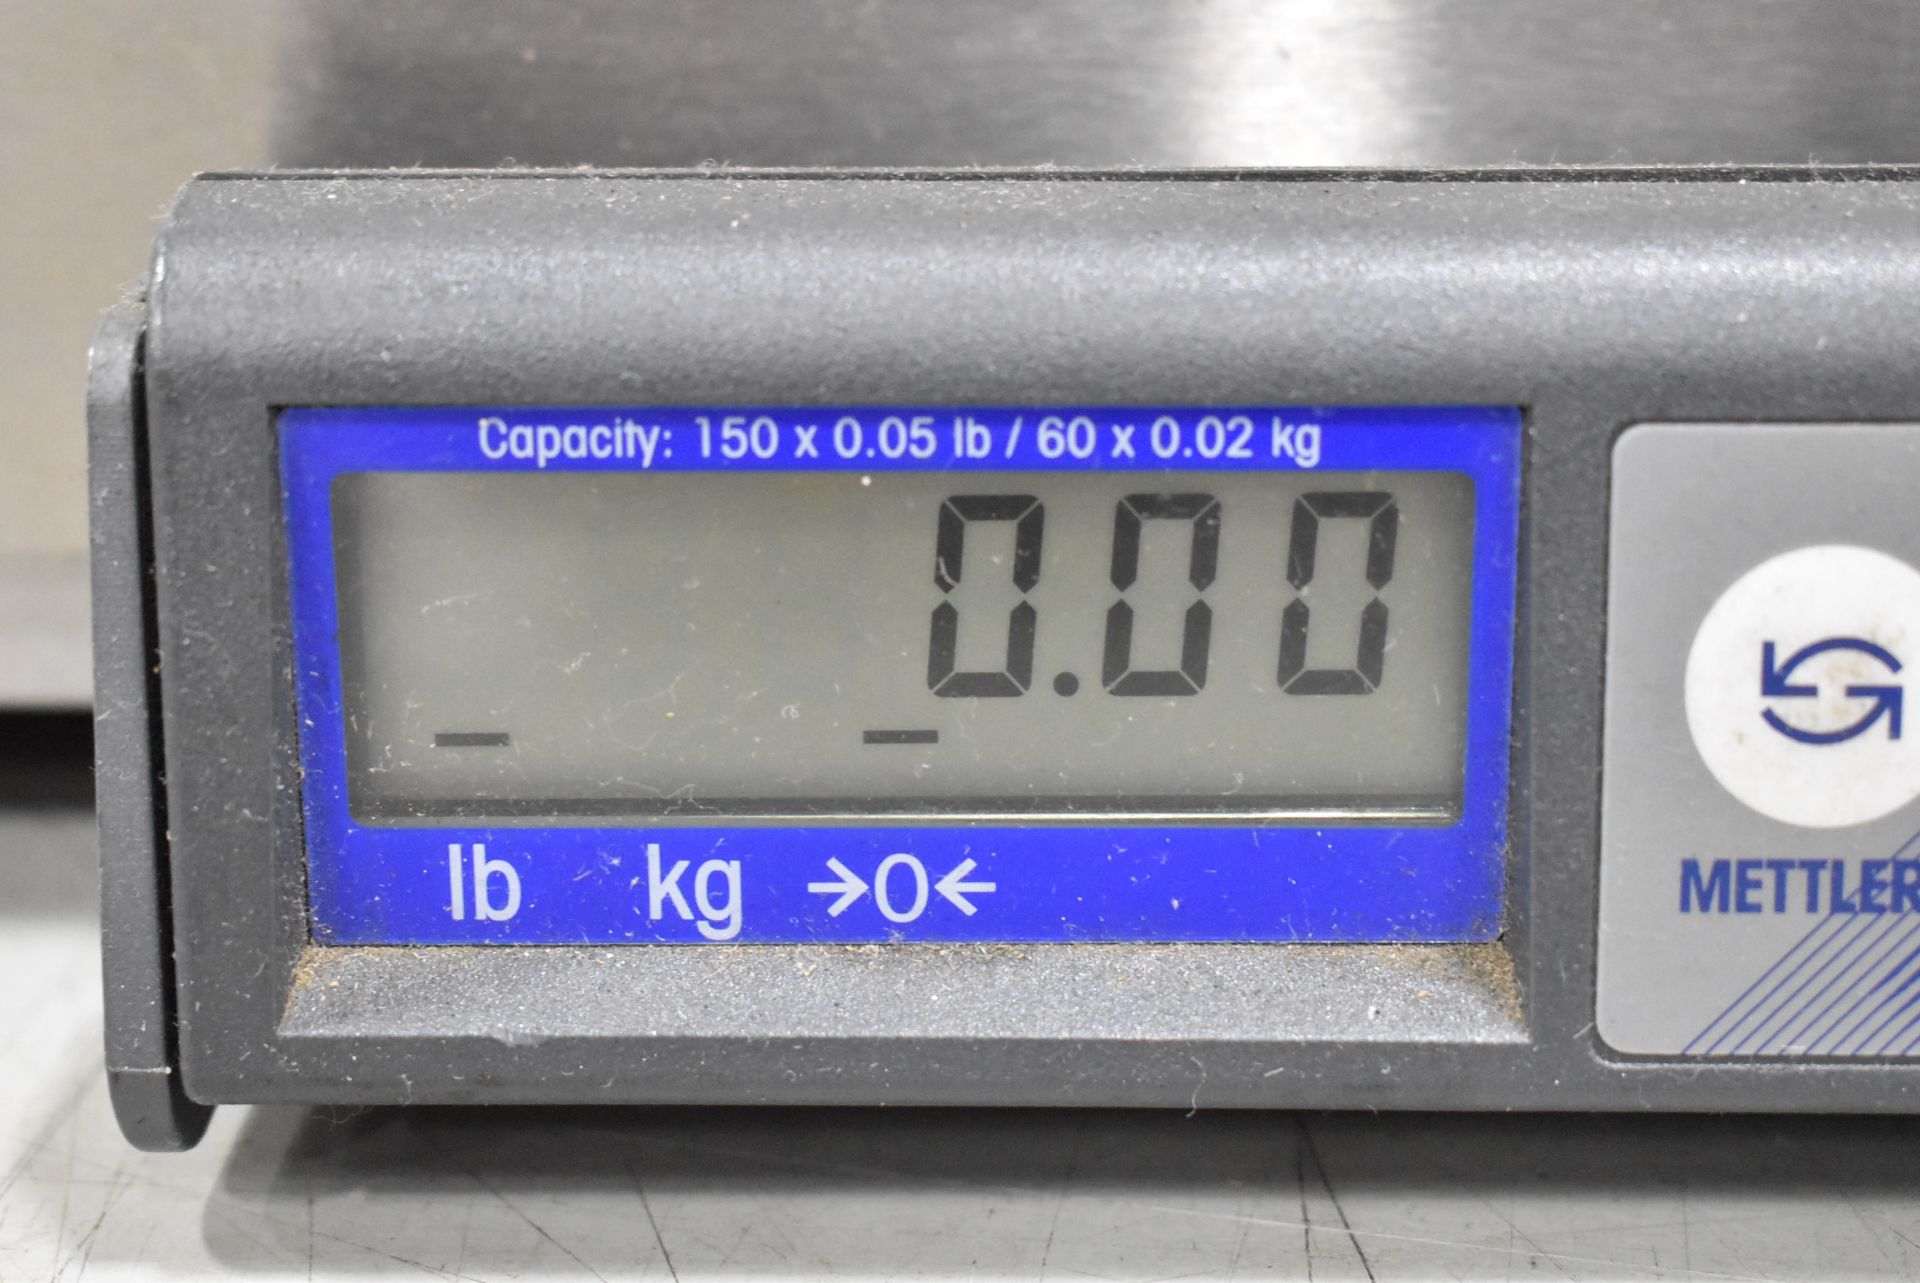 METTLER TOLEDO COUNTING SCALE WITH 150LBX0.05 CAPACITY, S/N N/A - Image 2 of 2